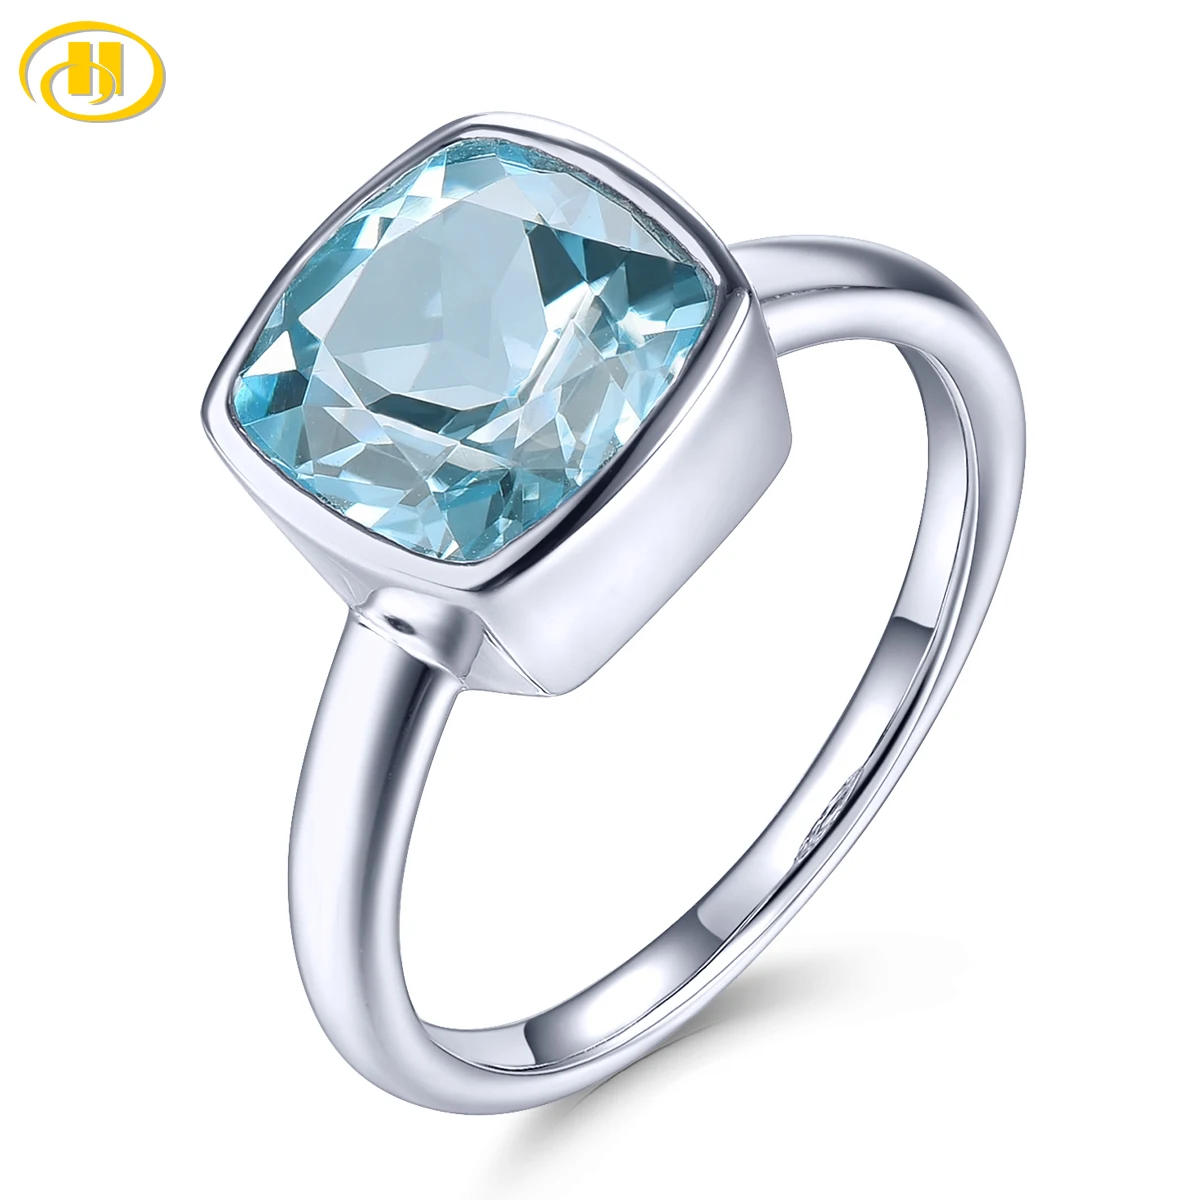 Natural Sky Blue Topaz Sterling Silver Rings 2.7 Carats Genuine Topaz Simple Classic Style Usual Occasions S925 Top Quality